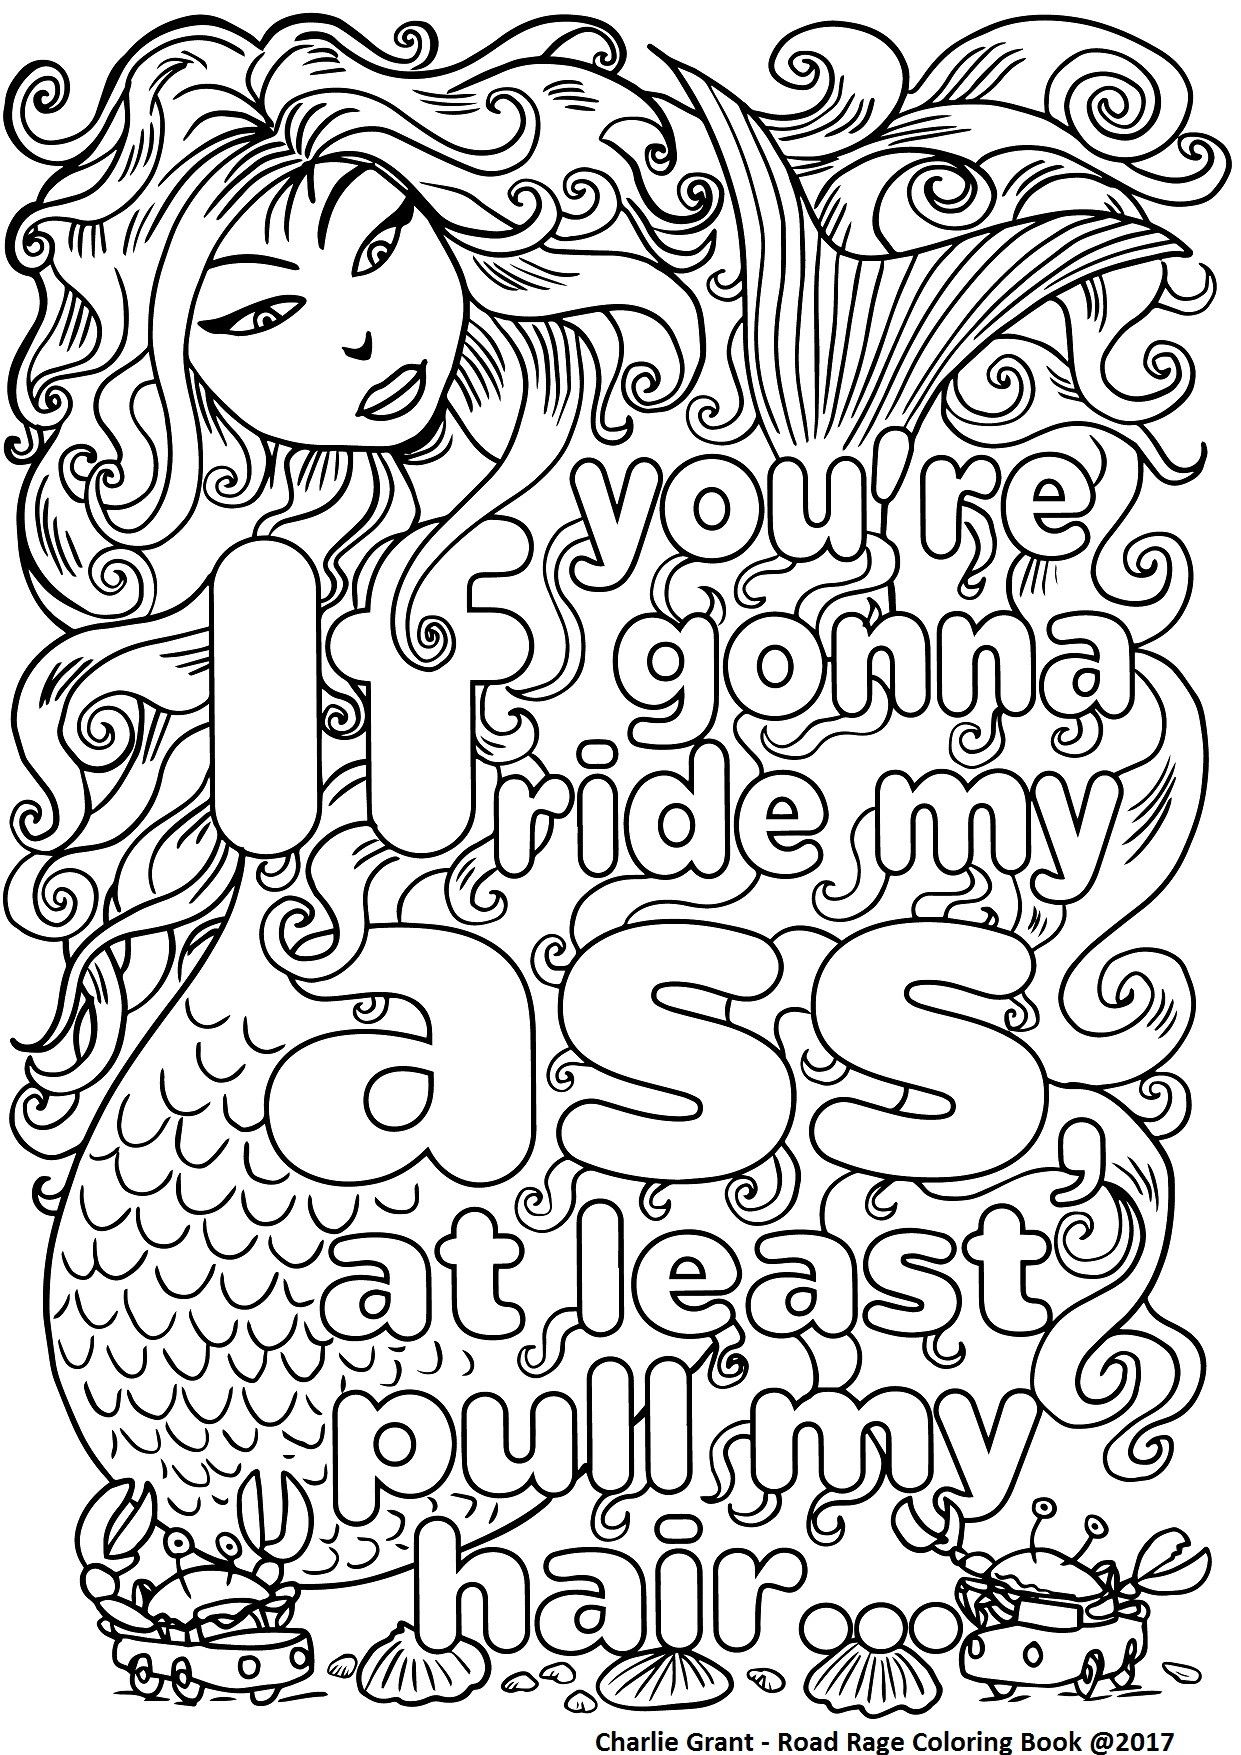 Swear Words Coloring Pages Coloring Home